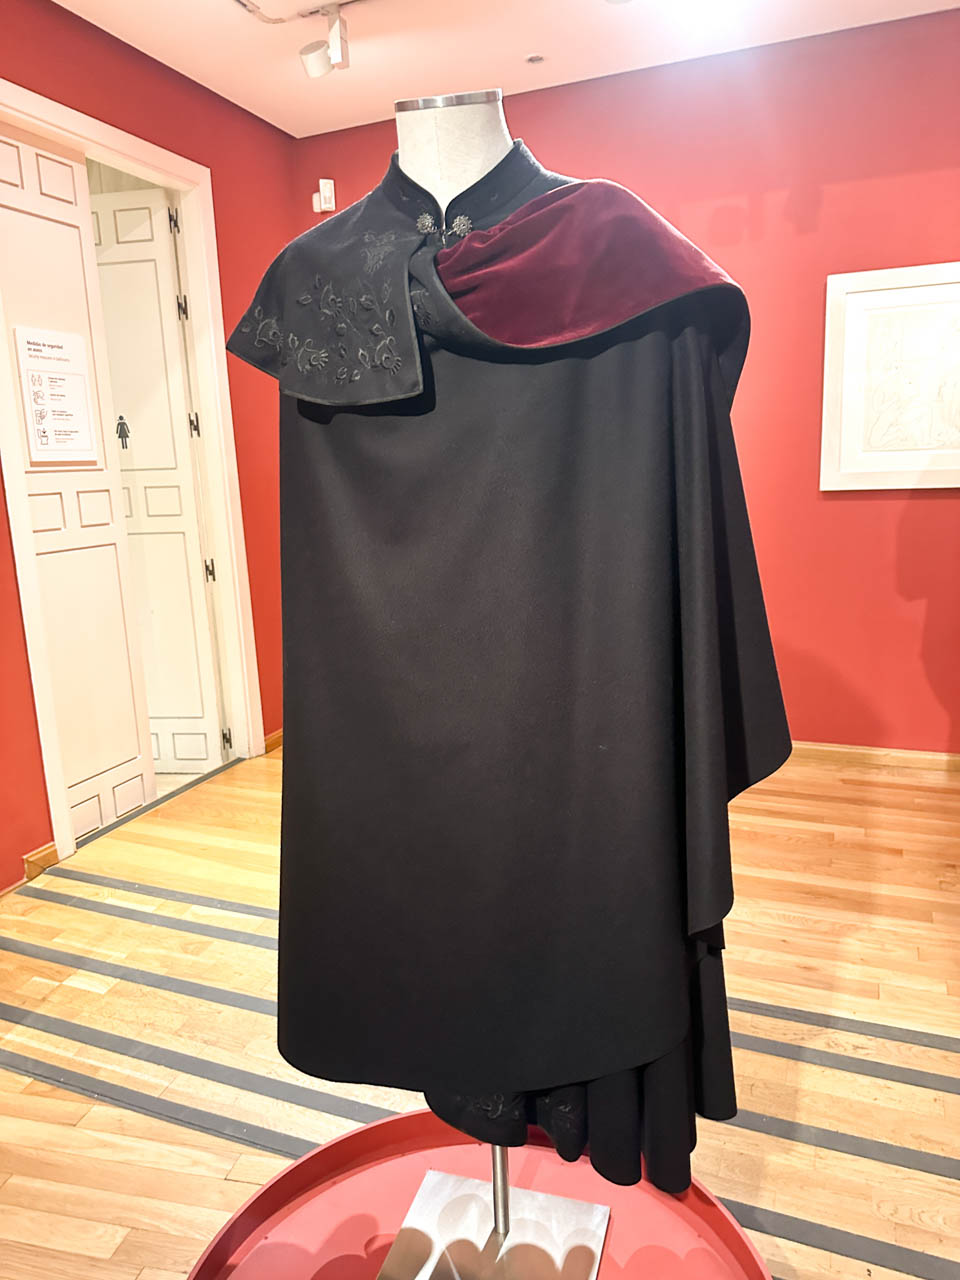 A traditional Spanish cape or "capote de paseo" displayed on a mannequin against a vivid red background inside the Museo Casa Natal de Picasso in Malaga, Spain